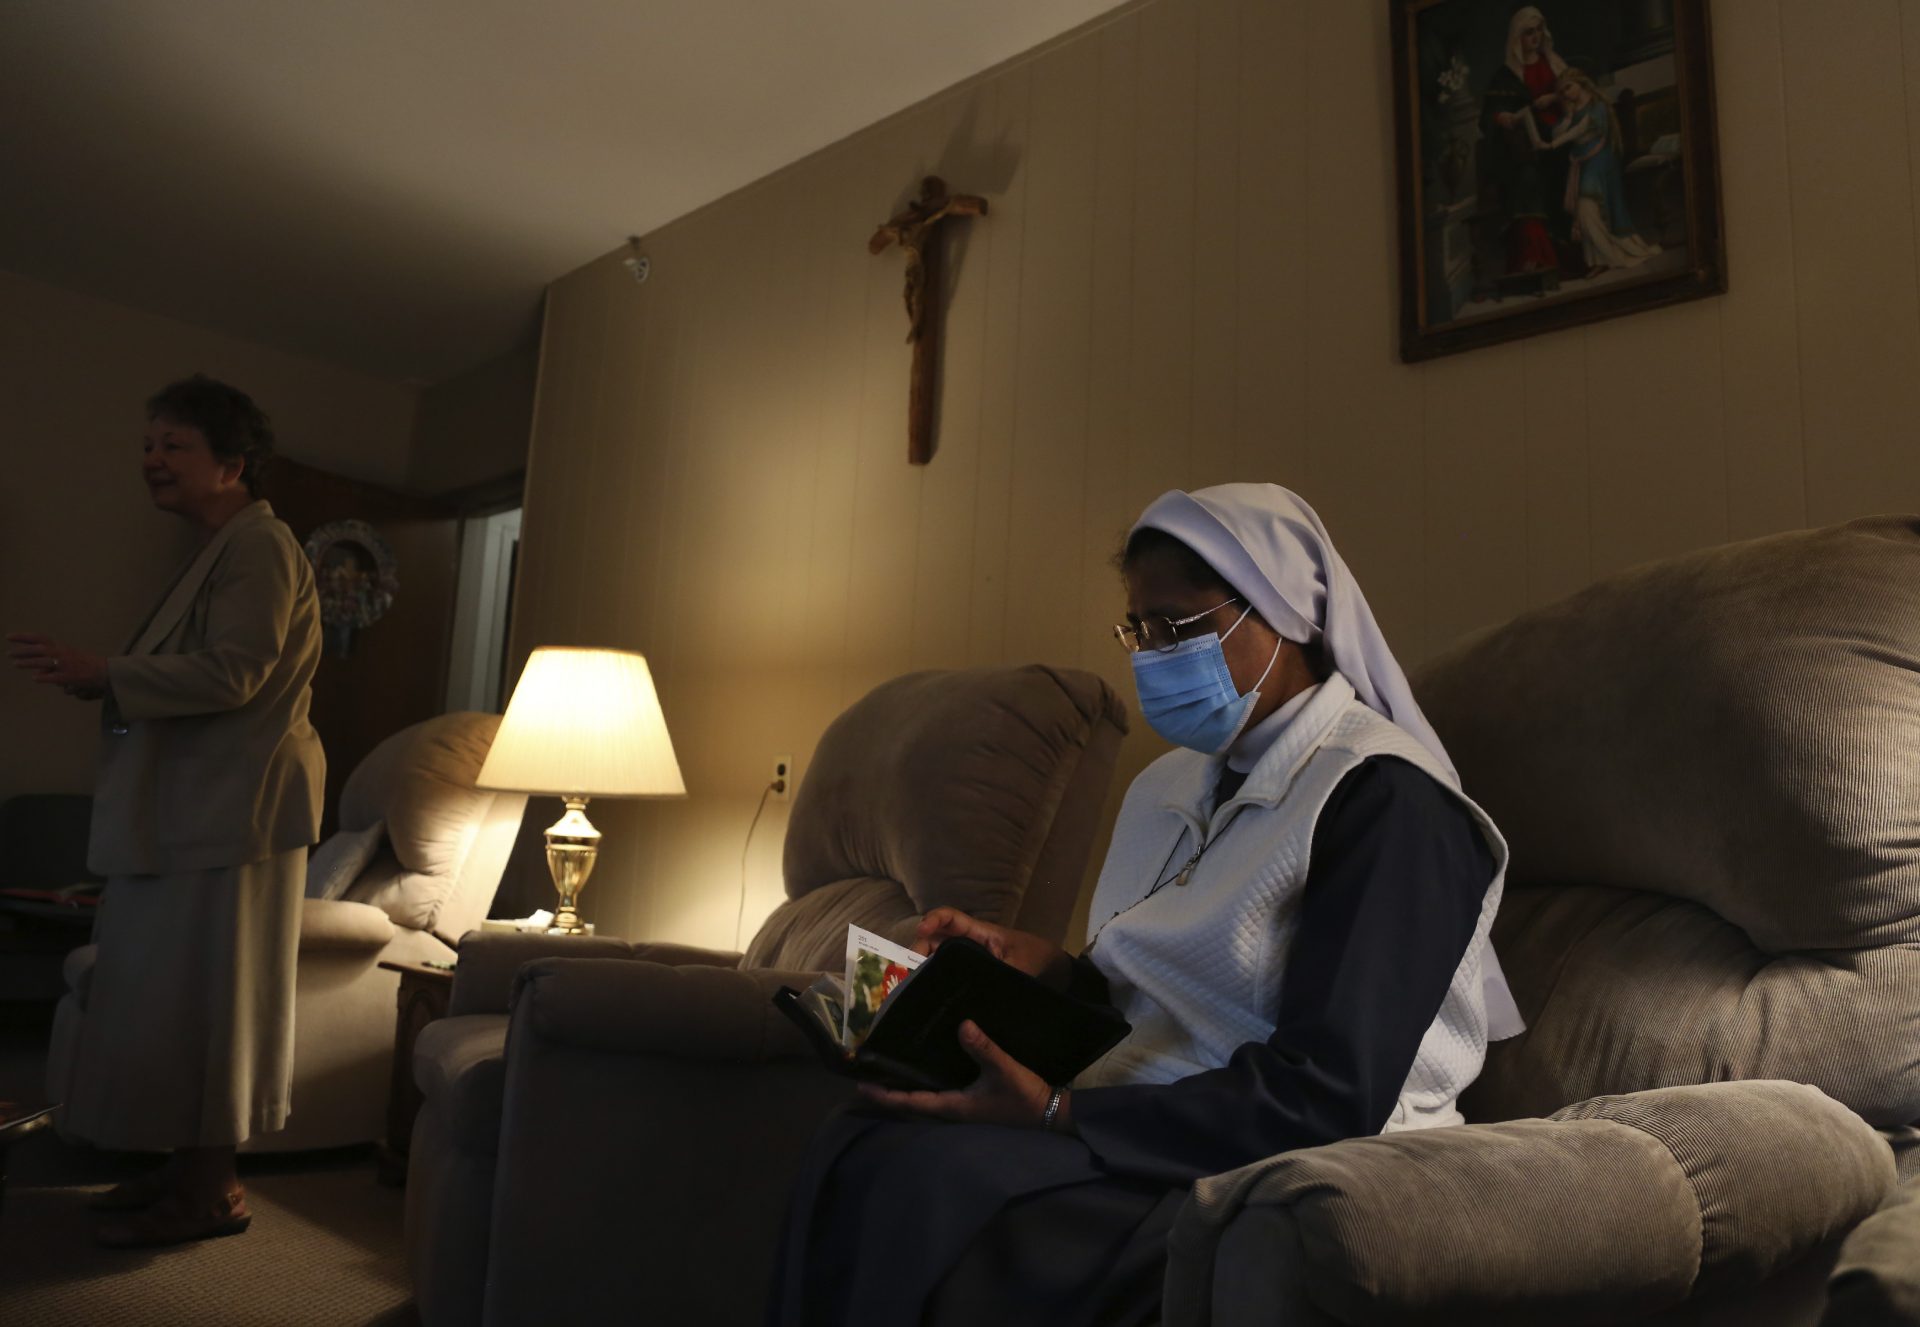 Sister Rose Nellivila sits for morning prayer at St. Anne Home in Greensburg, Pa., where she serves as a nurse for residents of the nursing facility, on Thursday, March 25, 2021.